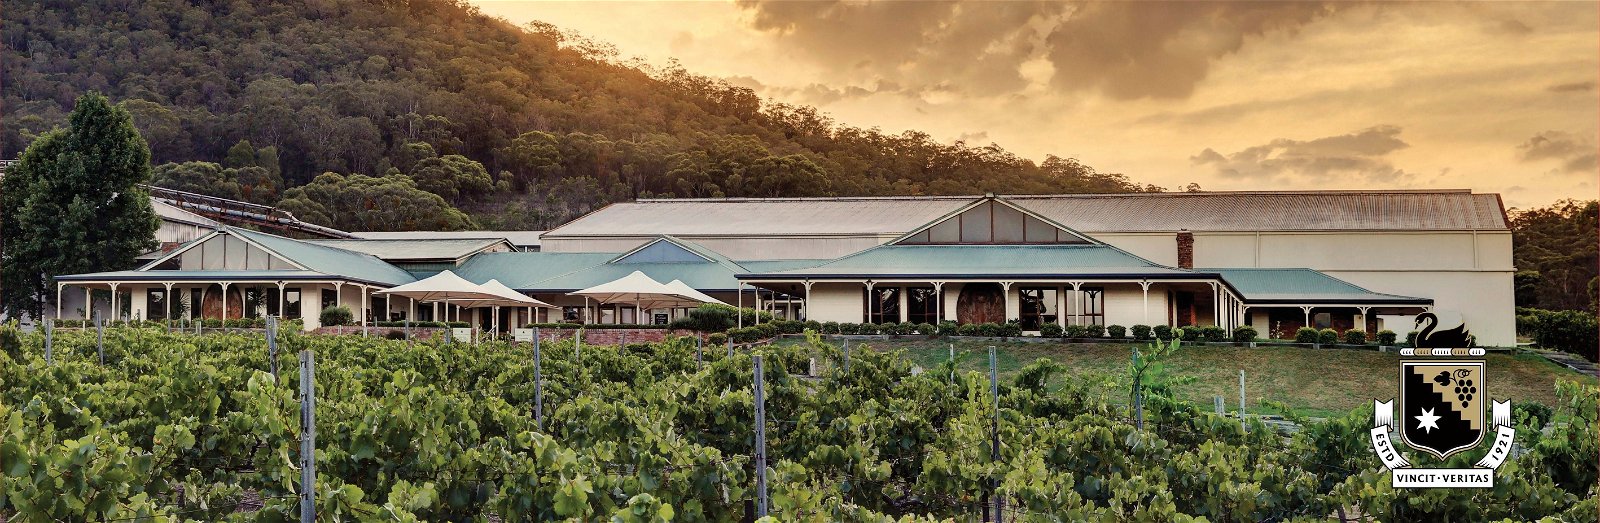 Mount Pleasant Wines - New South Wales Tourism 